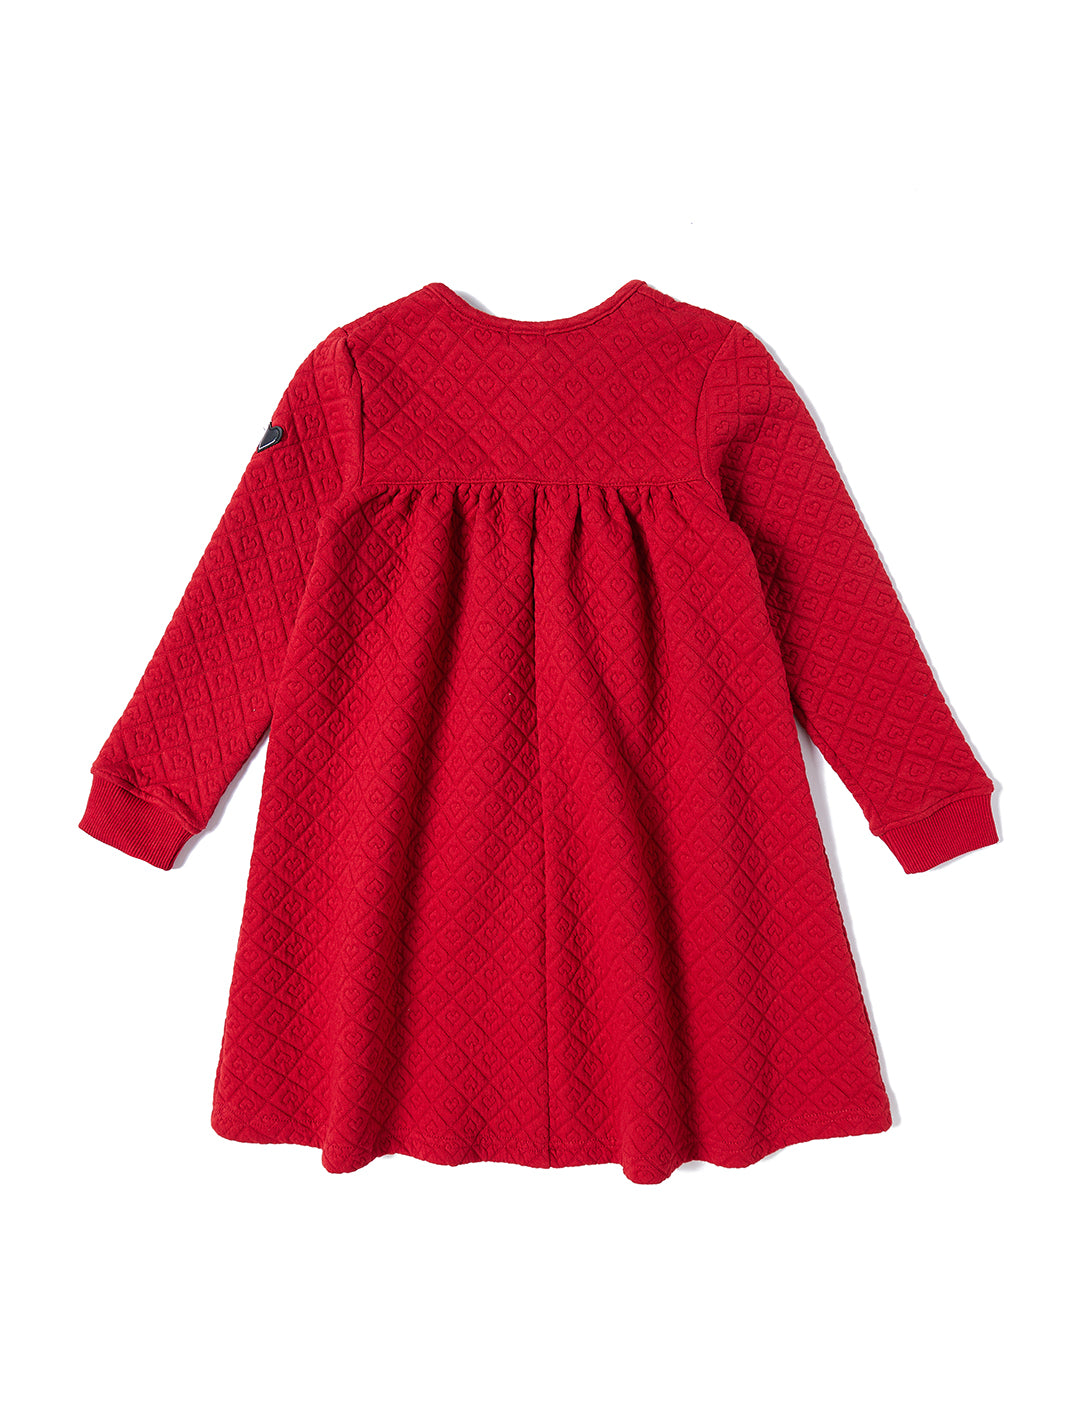 Quilted Heart Dress - Red